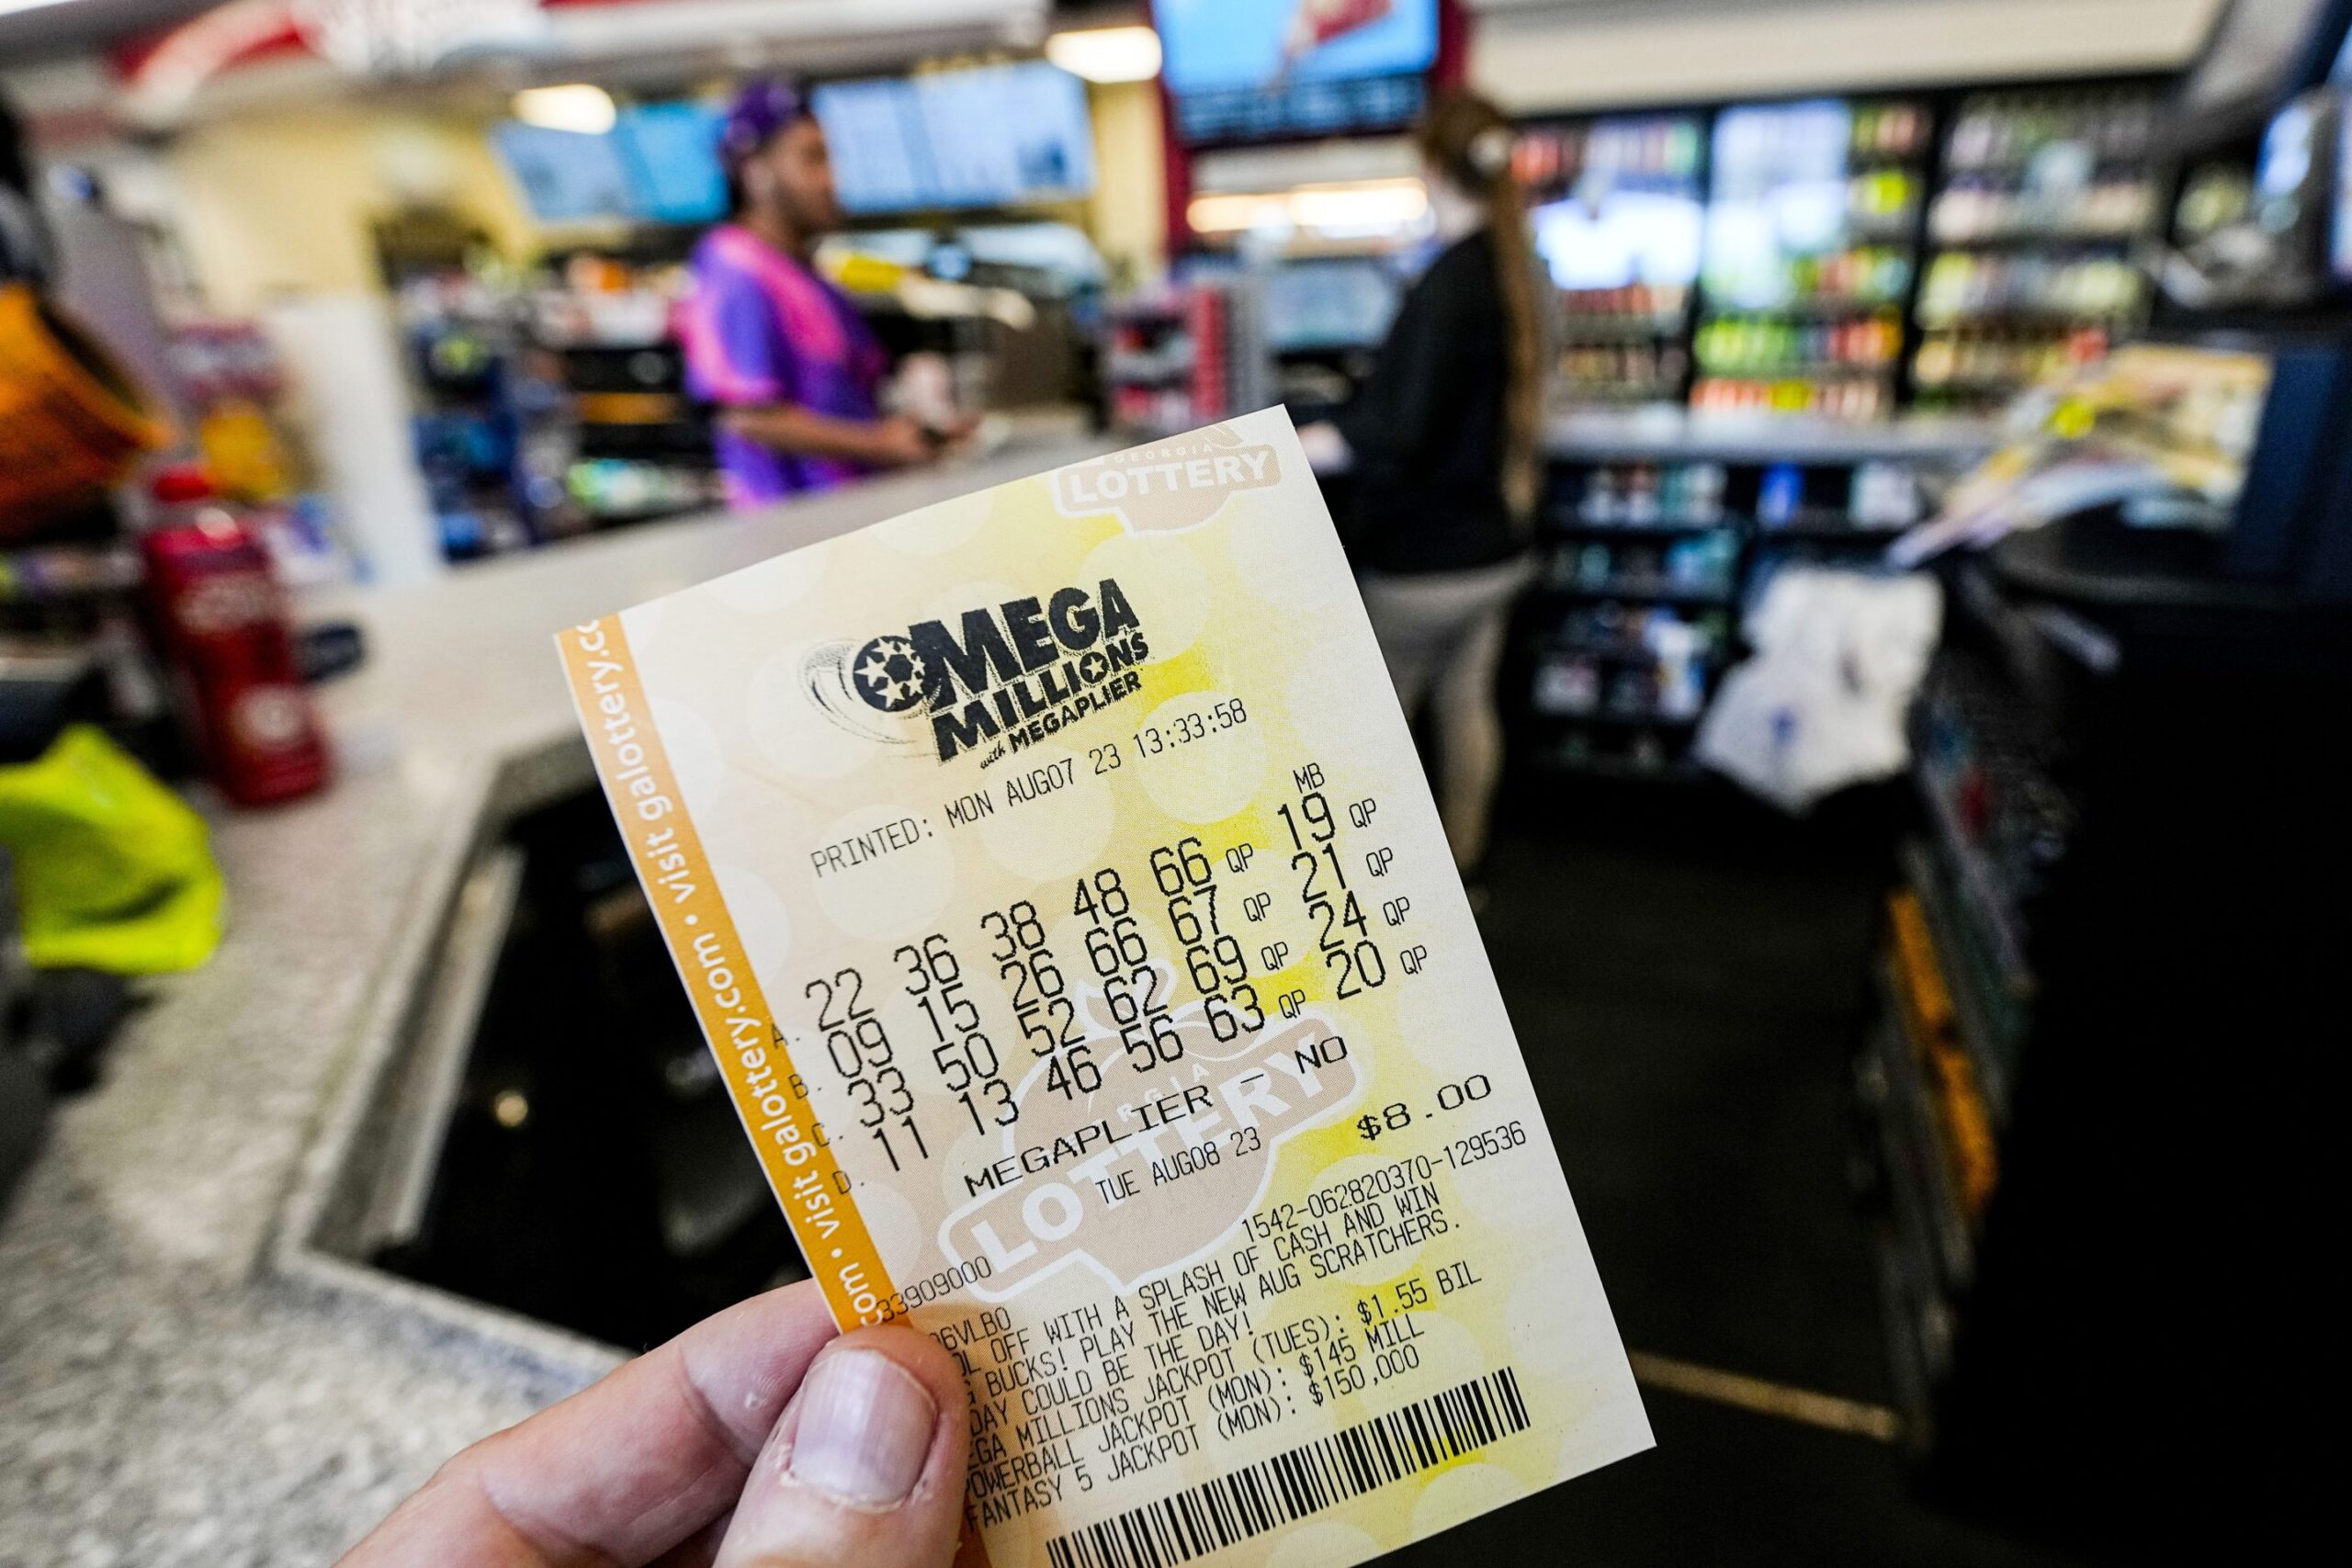 Florida has a new billionaire after someone bought a winning Mega Millions lottery ticket at a Publix store in Neptune Beach